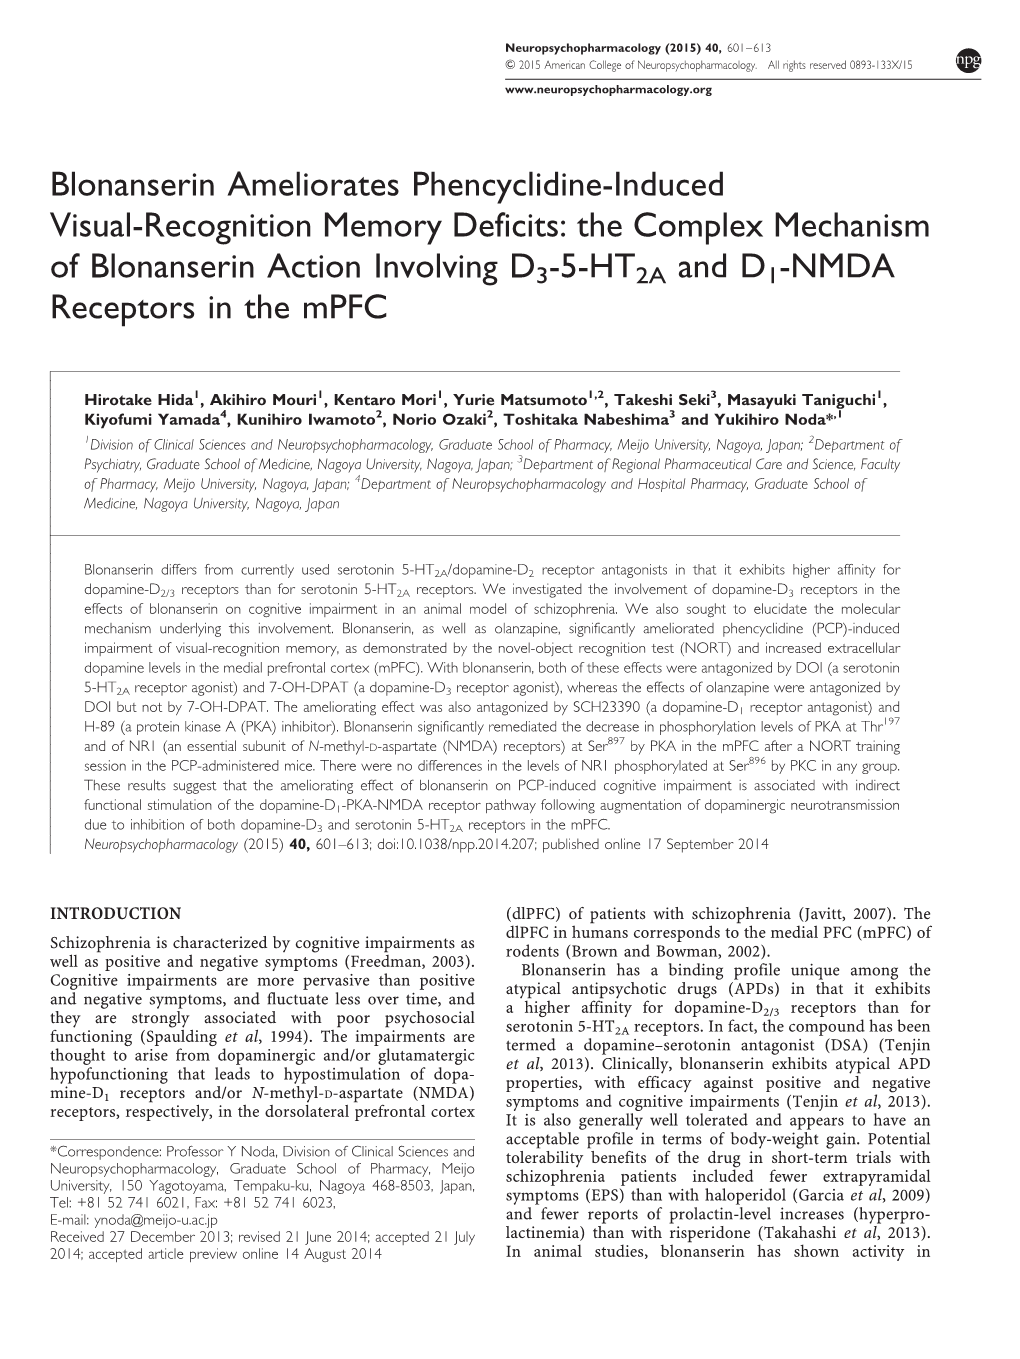 Blonanserin Ameliorates Phencyclidine-Induced Visual-Recognition Memory Deficits: the Complex Mechanism of Blonanserin Action In